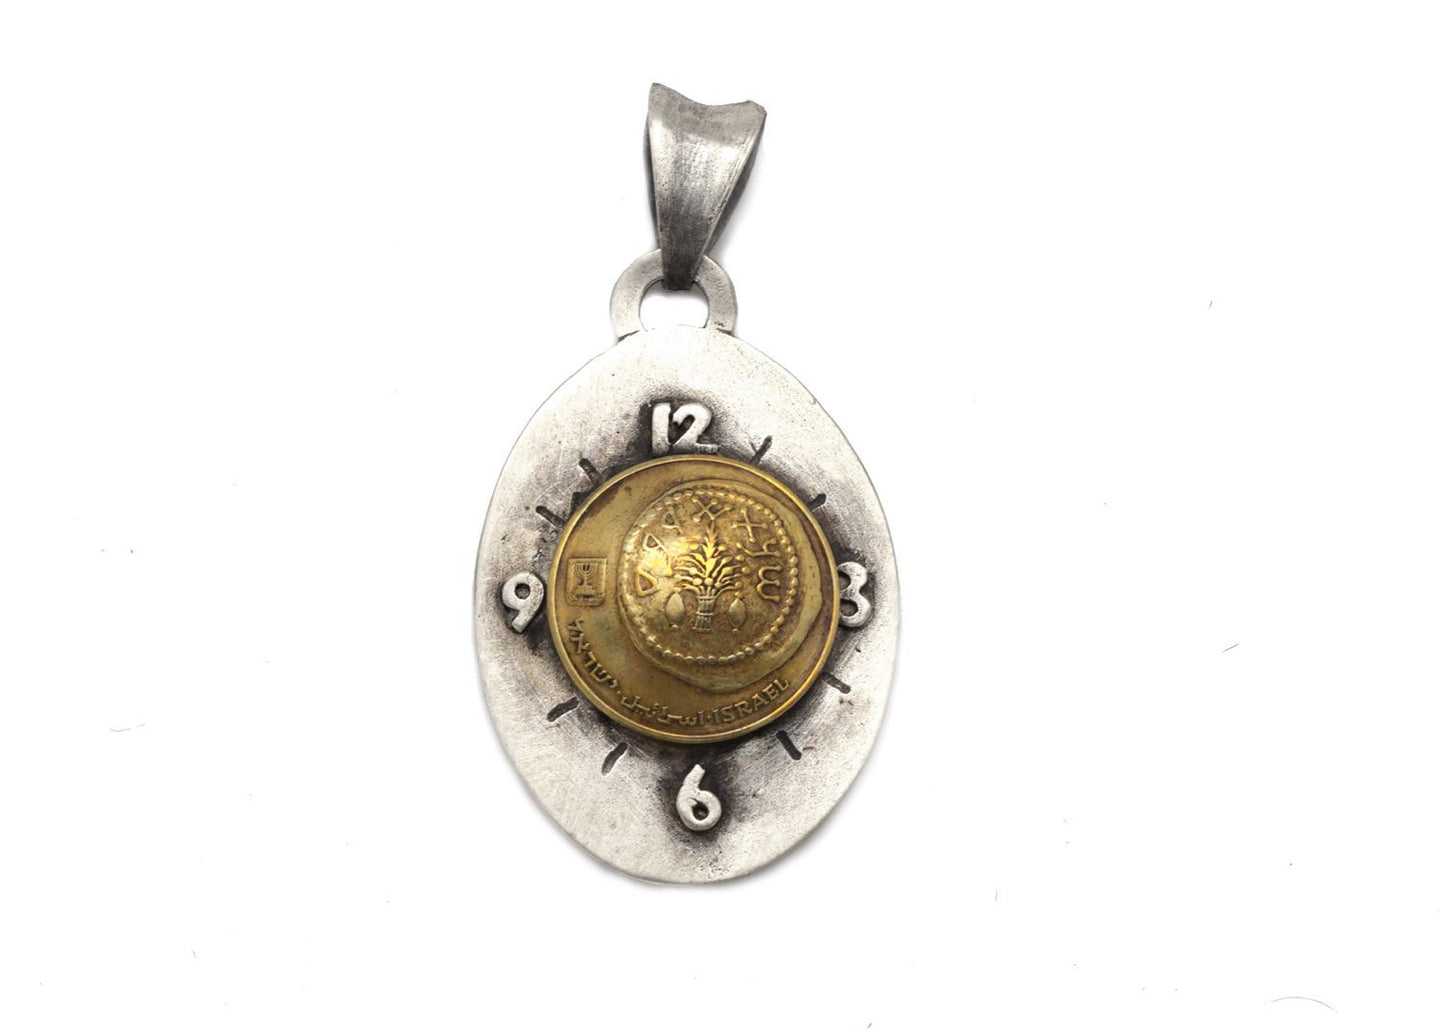 Israeli Coin Necklace - 5 Agorot coin of Israel Clock Pendant